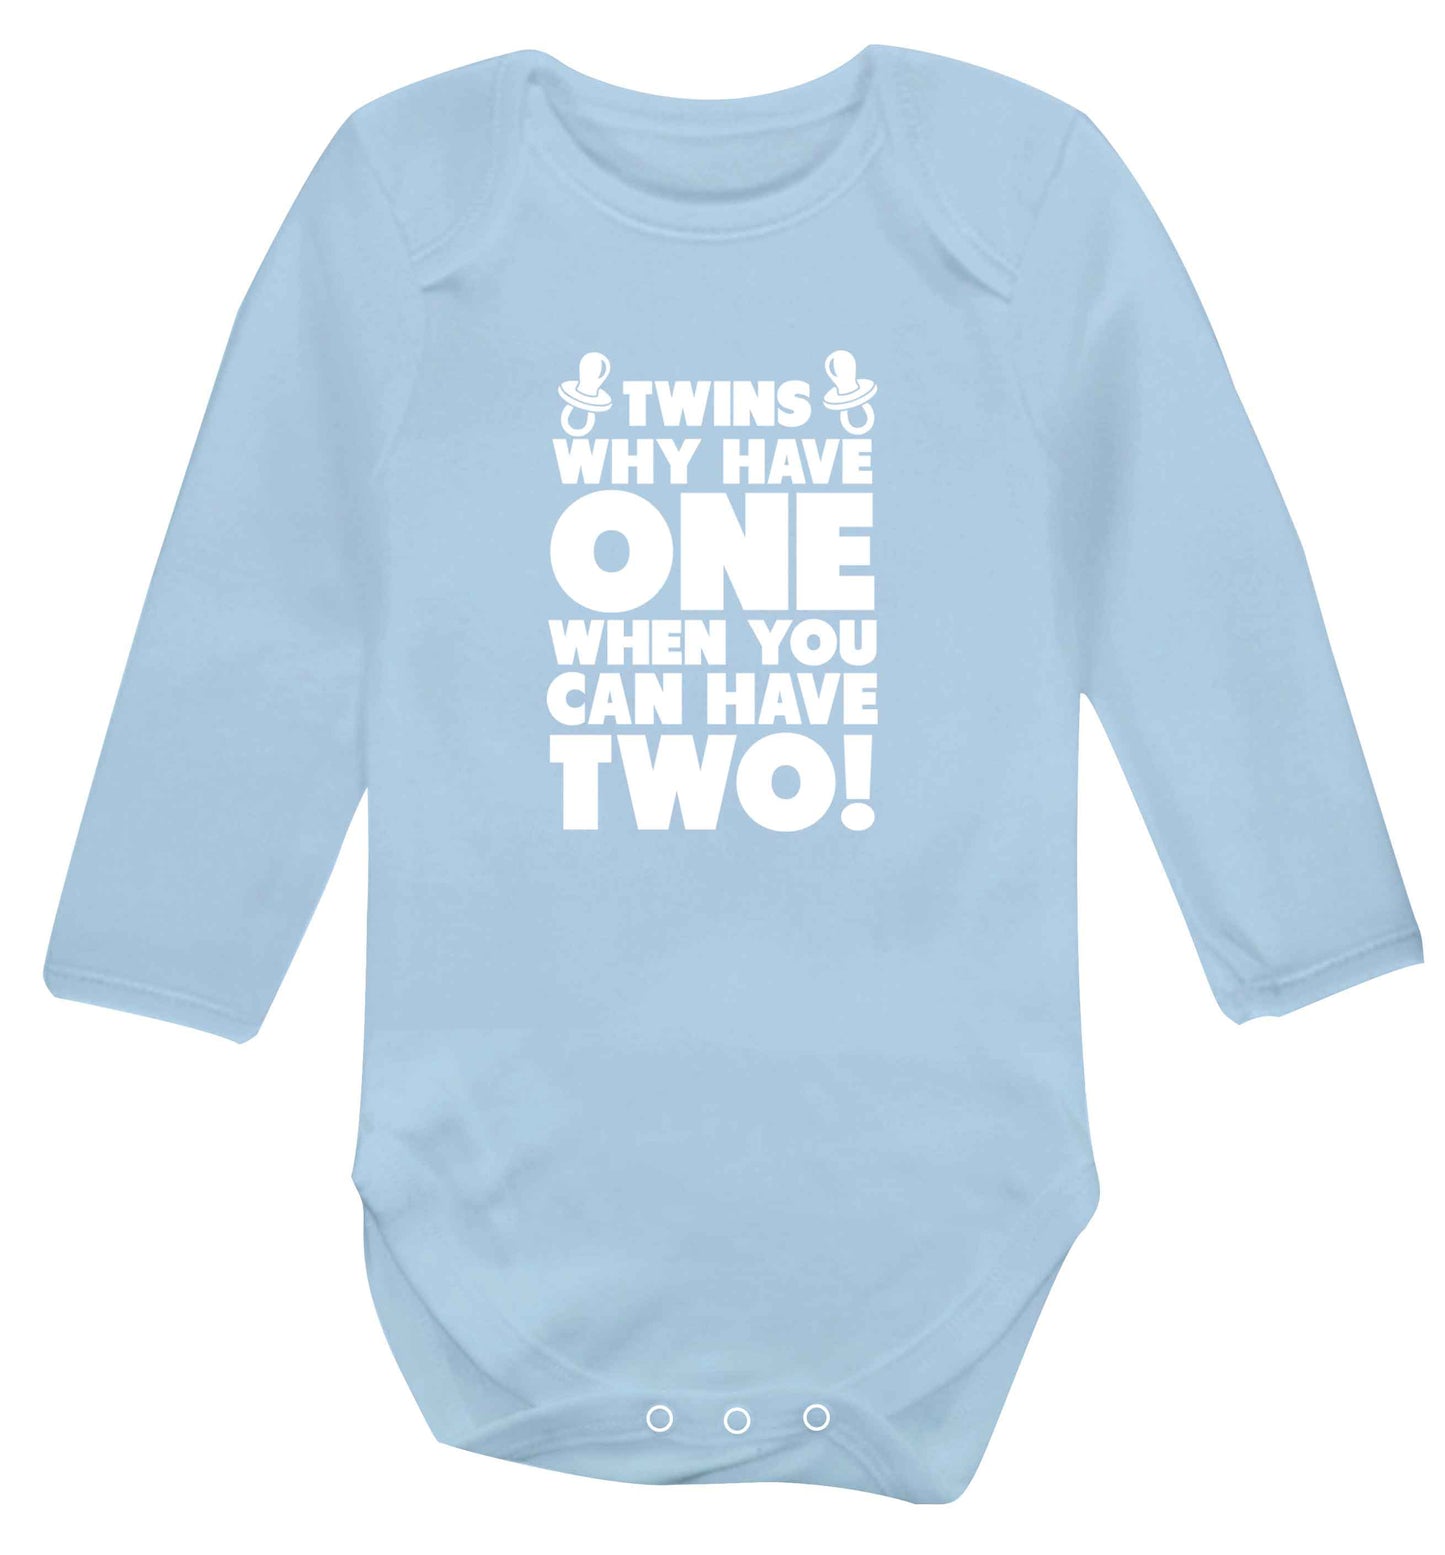 Twins why have one when you can have two baby vest long sleeved pale blue 6-12 months